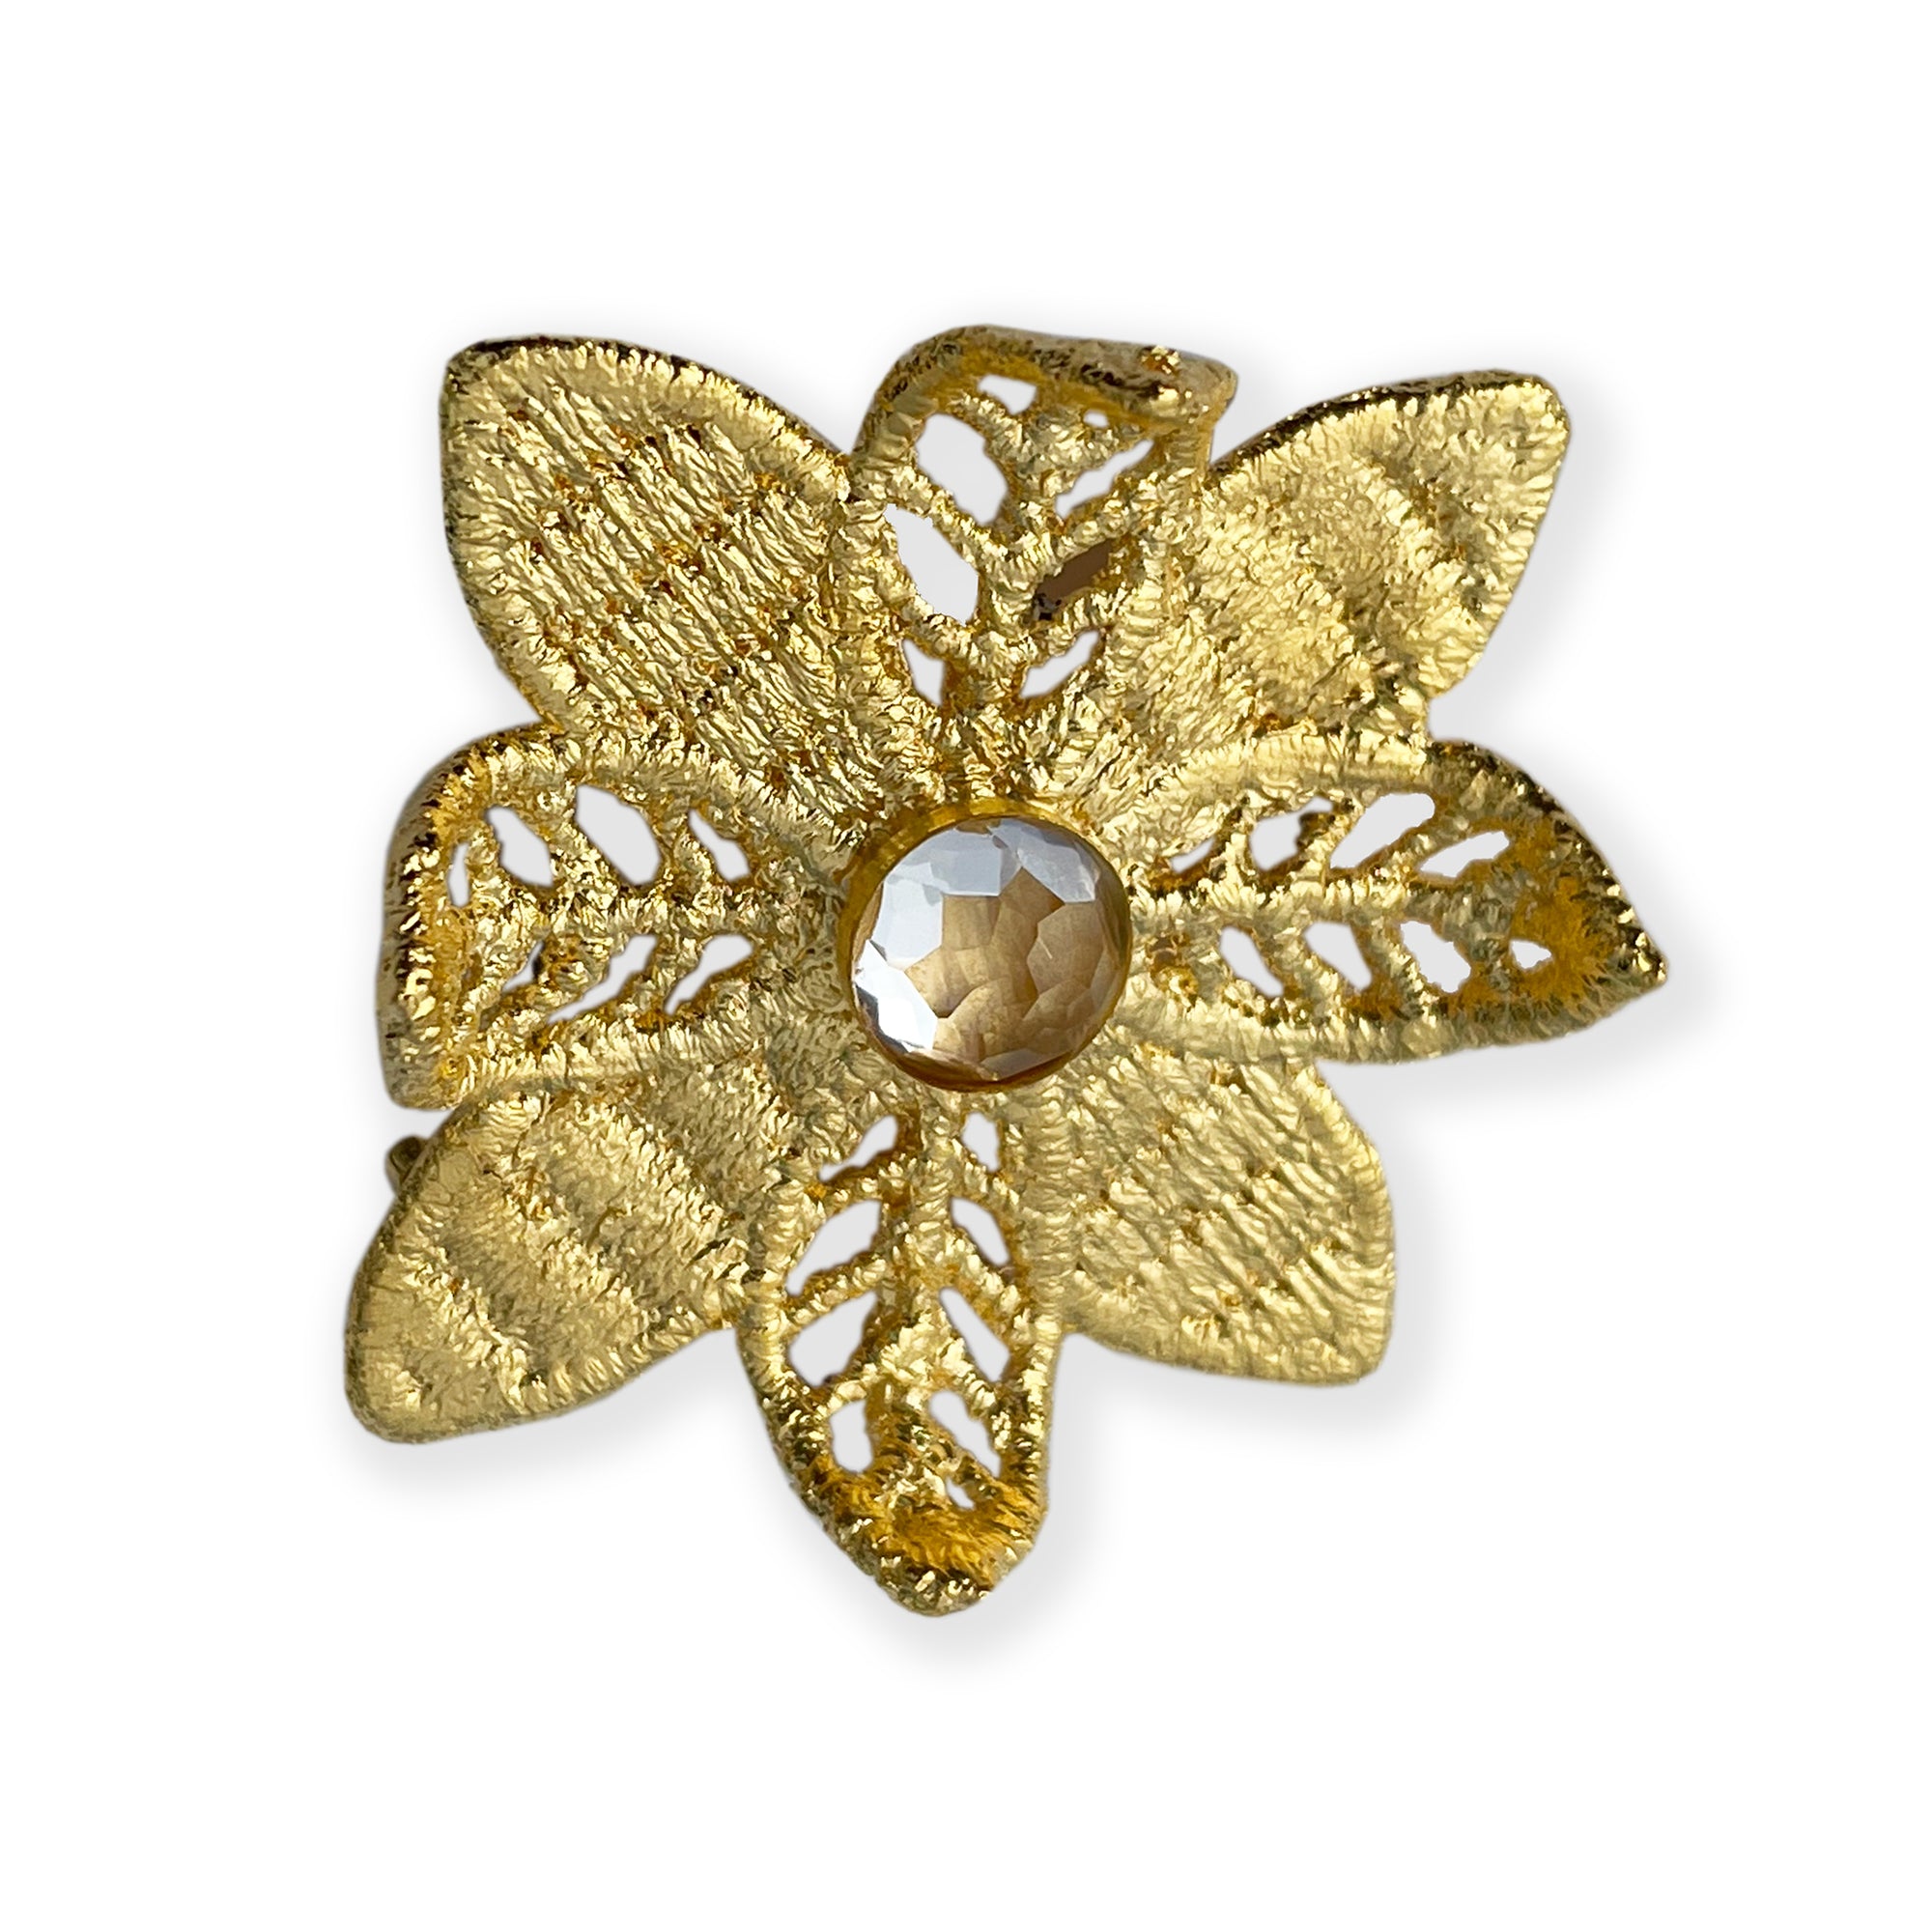 Beatrix lace flower barrette in 24k gold with Topaz stone.